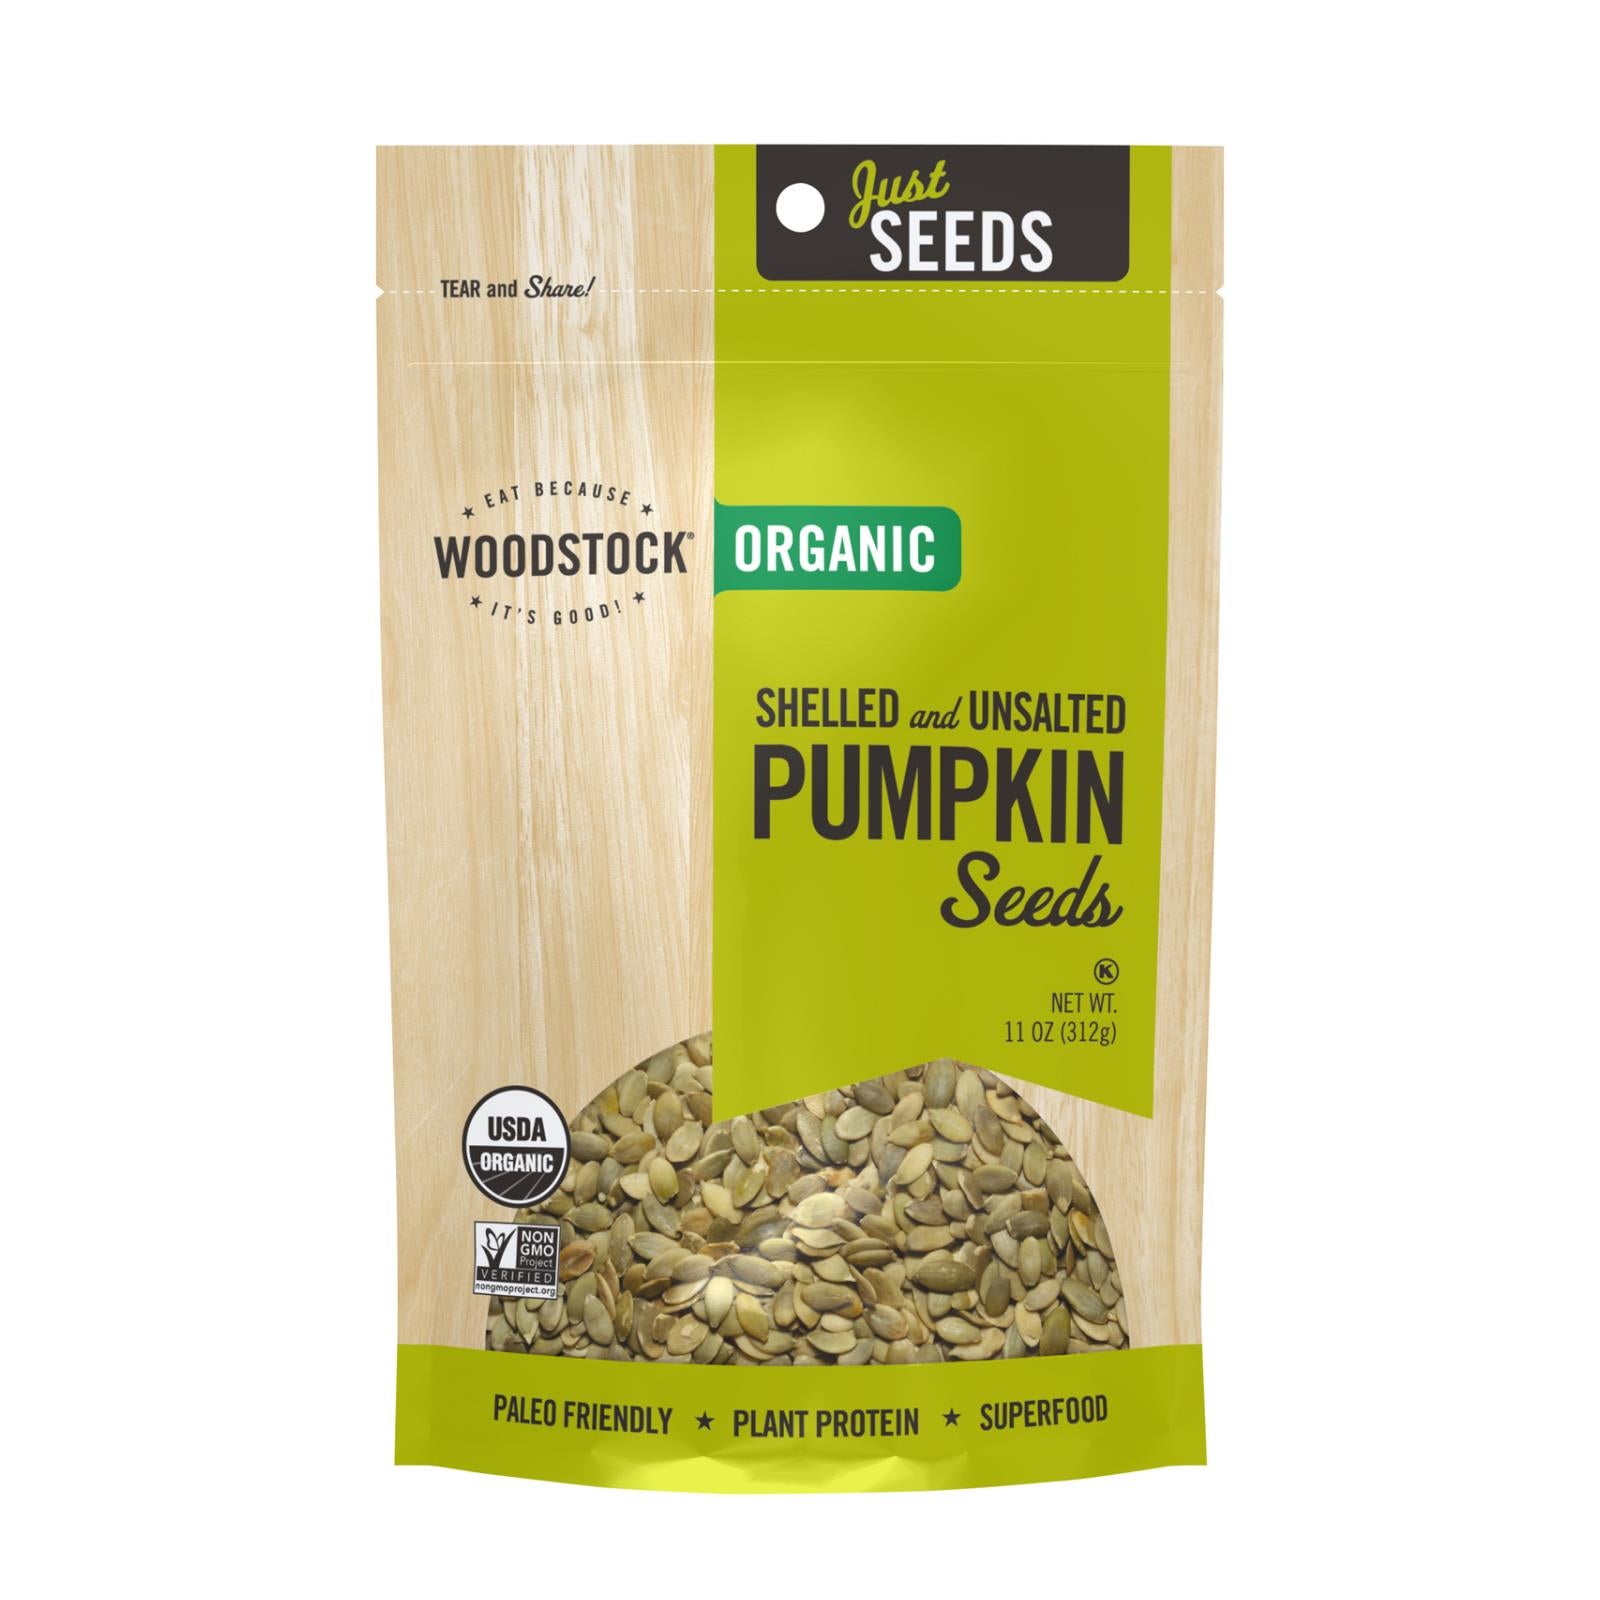 Woodstock Organic Shelled And Unsalted Pumpkin Seeds - Case Of 8 - 11 Oz